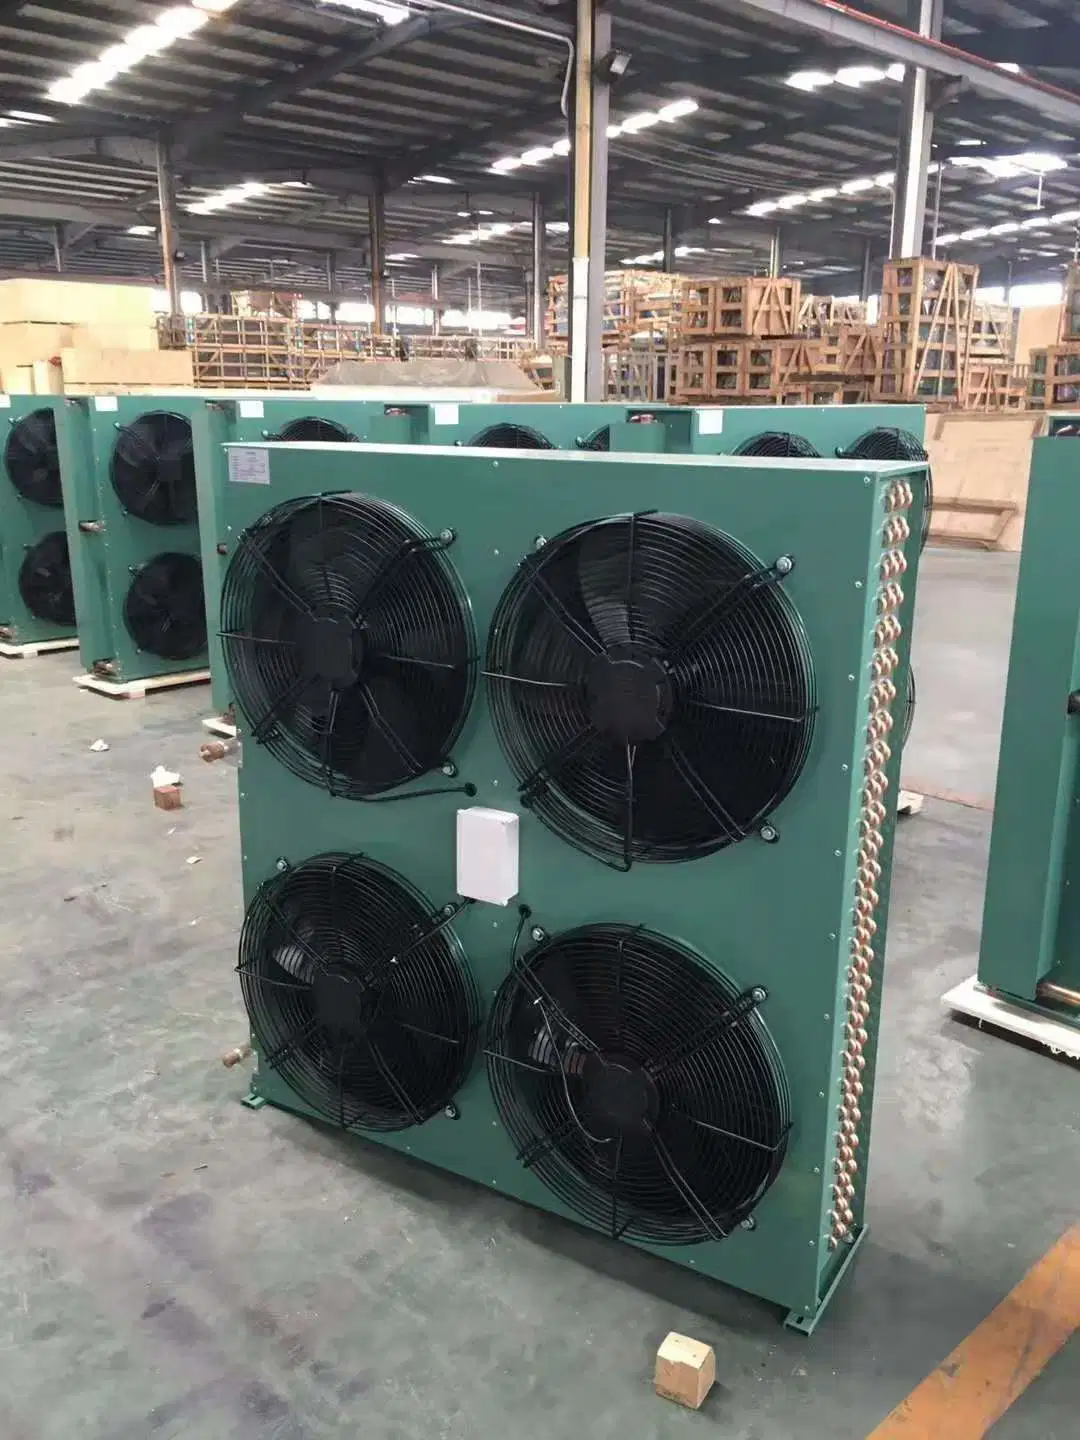 Low Noise Air-Cooled Flat Type Condenser Tube for Refrigeration System with Fan